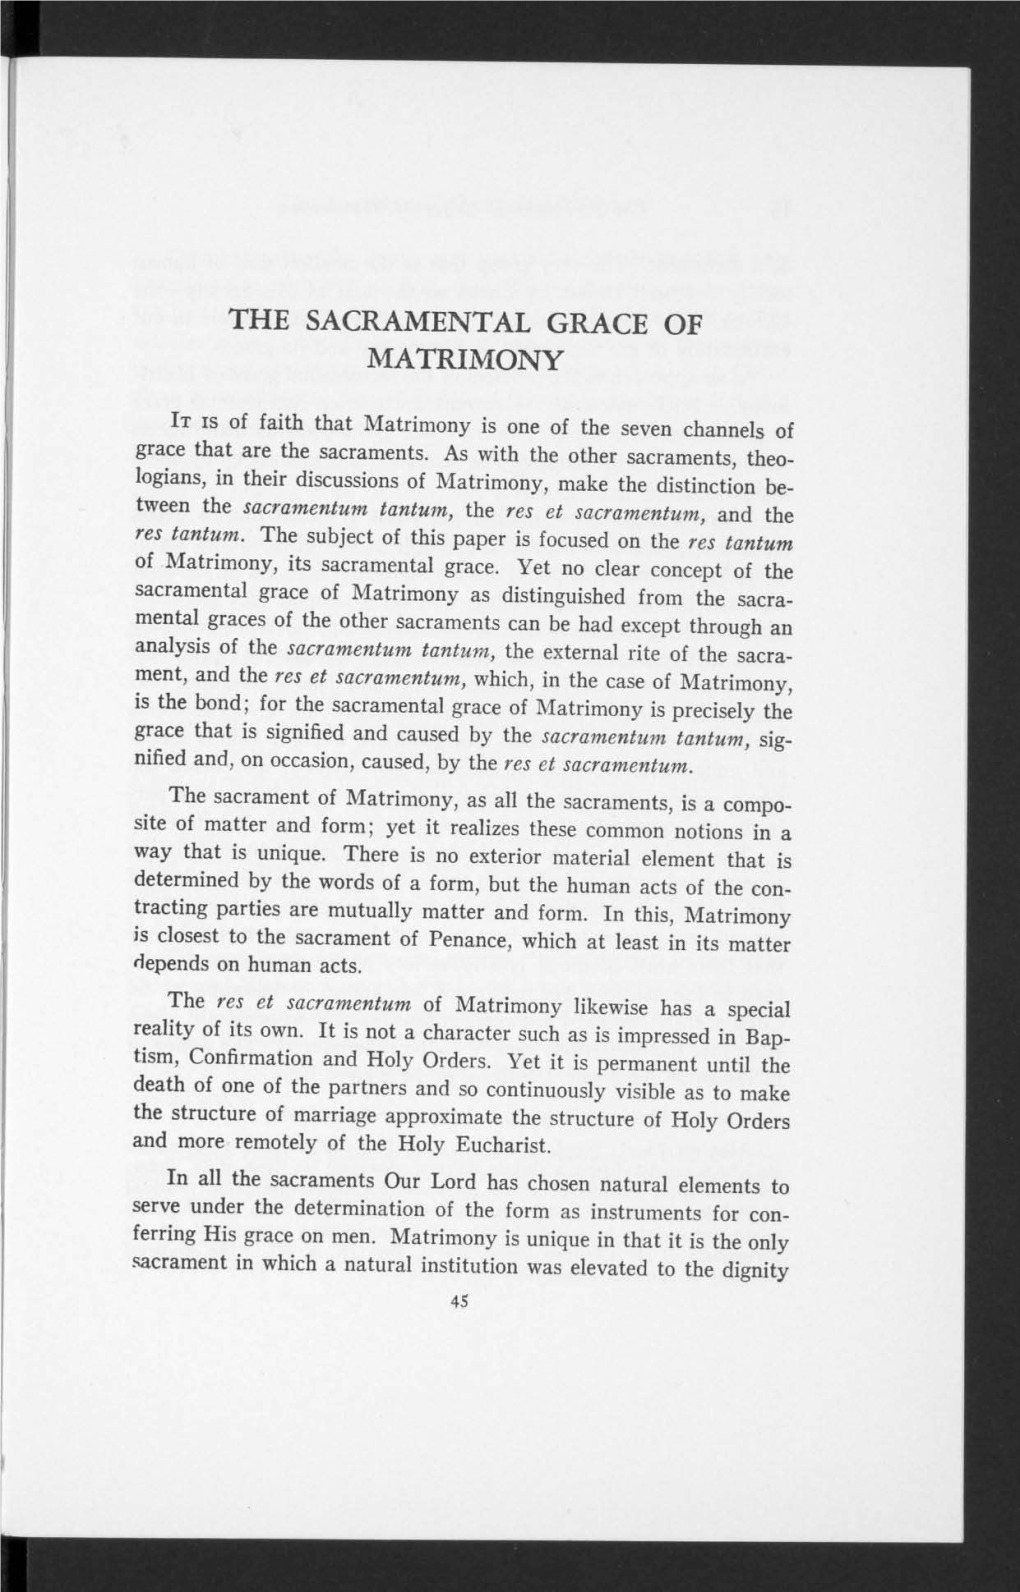 THE SACRAMENTAL GRACE of MATRIMONY IT IS of Faith That Matrimony Is One of the Seven Channels of Grace That Are the Sacraments